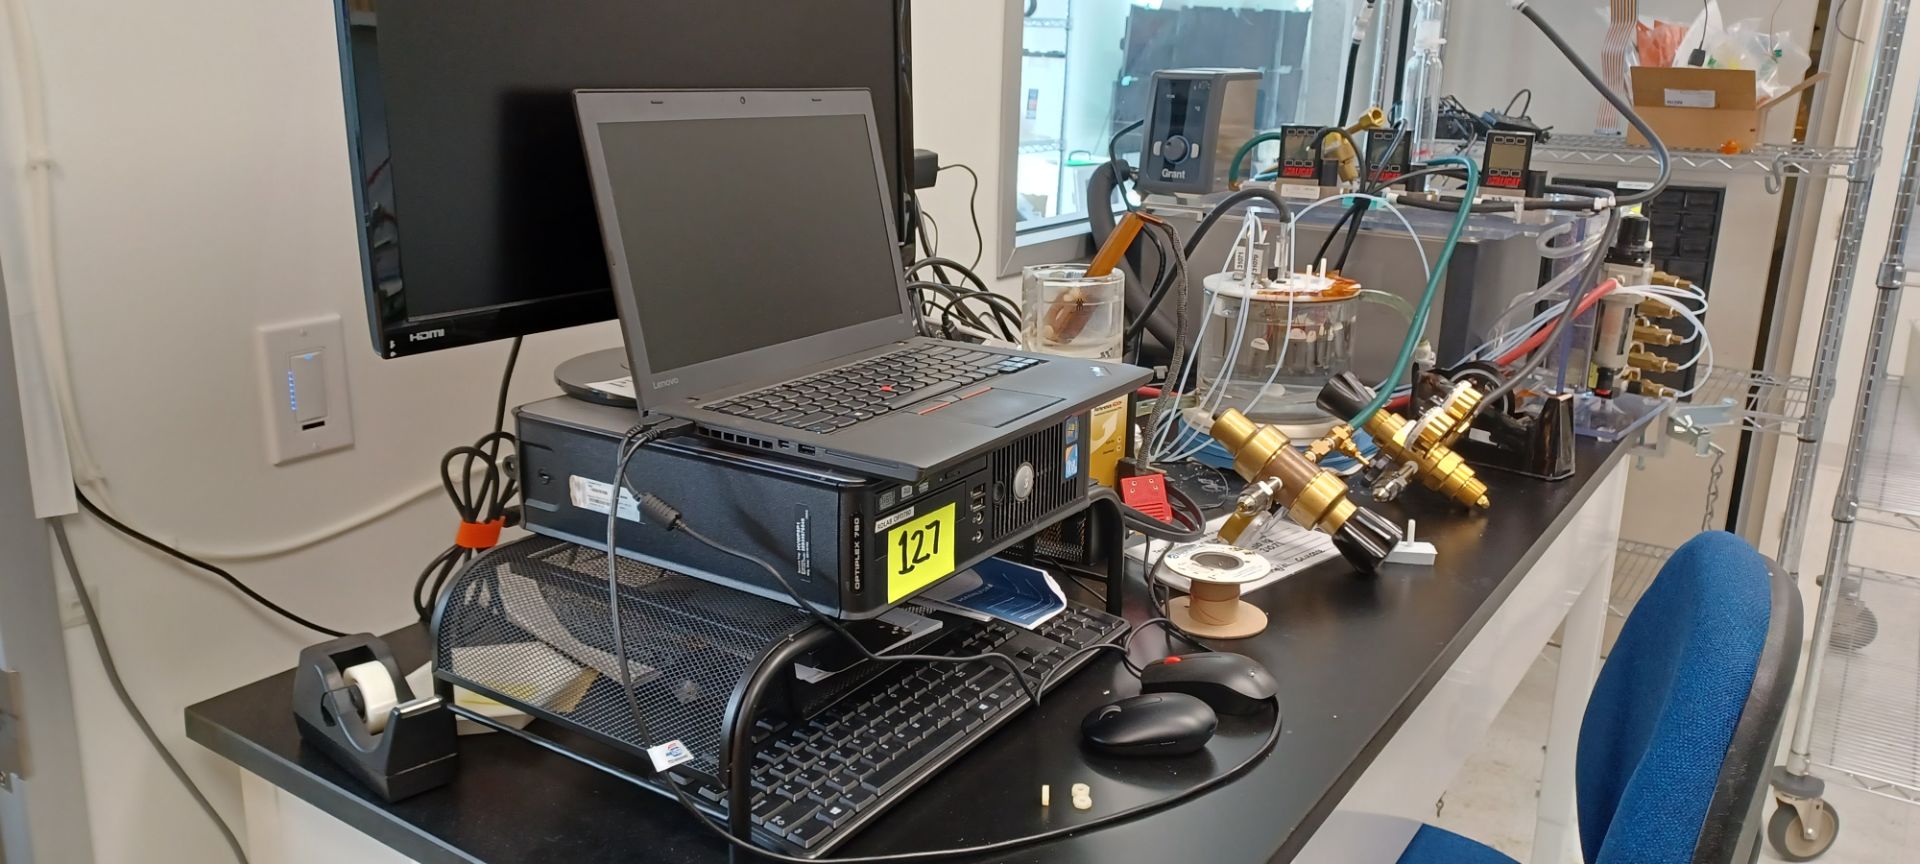 MODULE TESTING CENTER WITH ALICAT SCIENTIFIC MASS FLOW METERS & LAPTOP & CONTENTS BELOW THE TABLE - Image 4 of 13